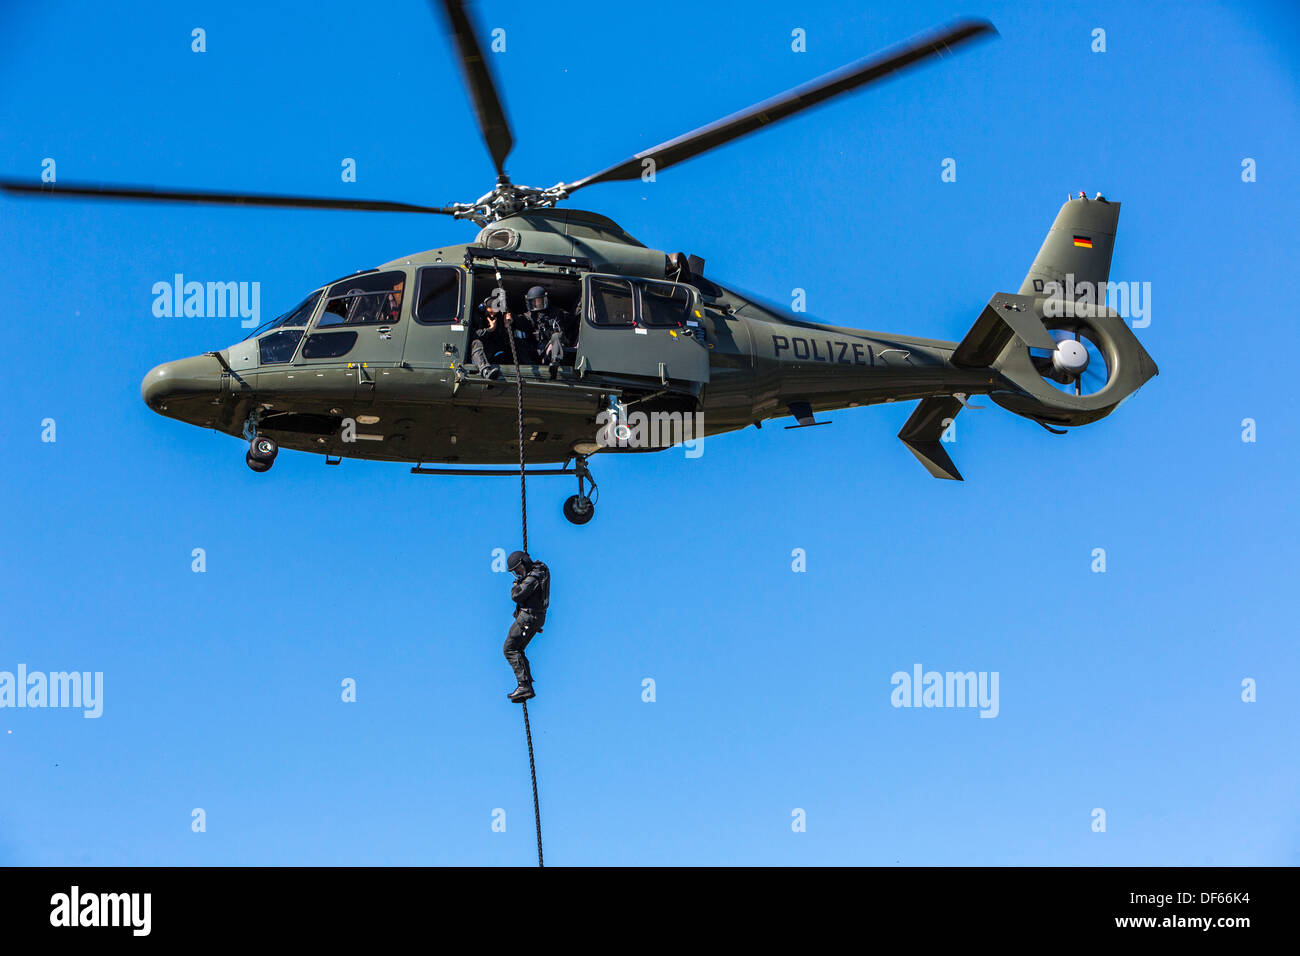 Police SWAT Team, fast roping from a police helicopter. Stock Photo